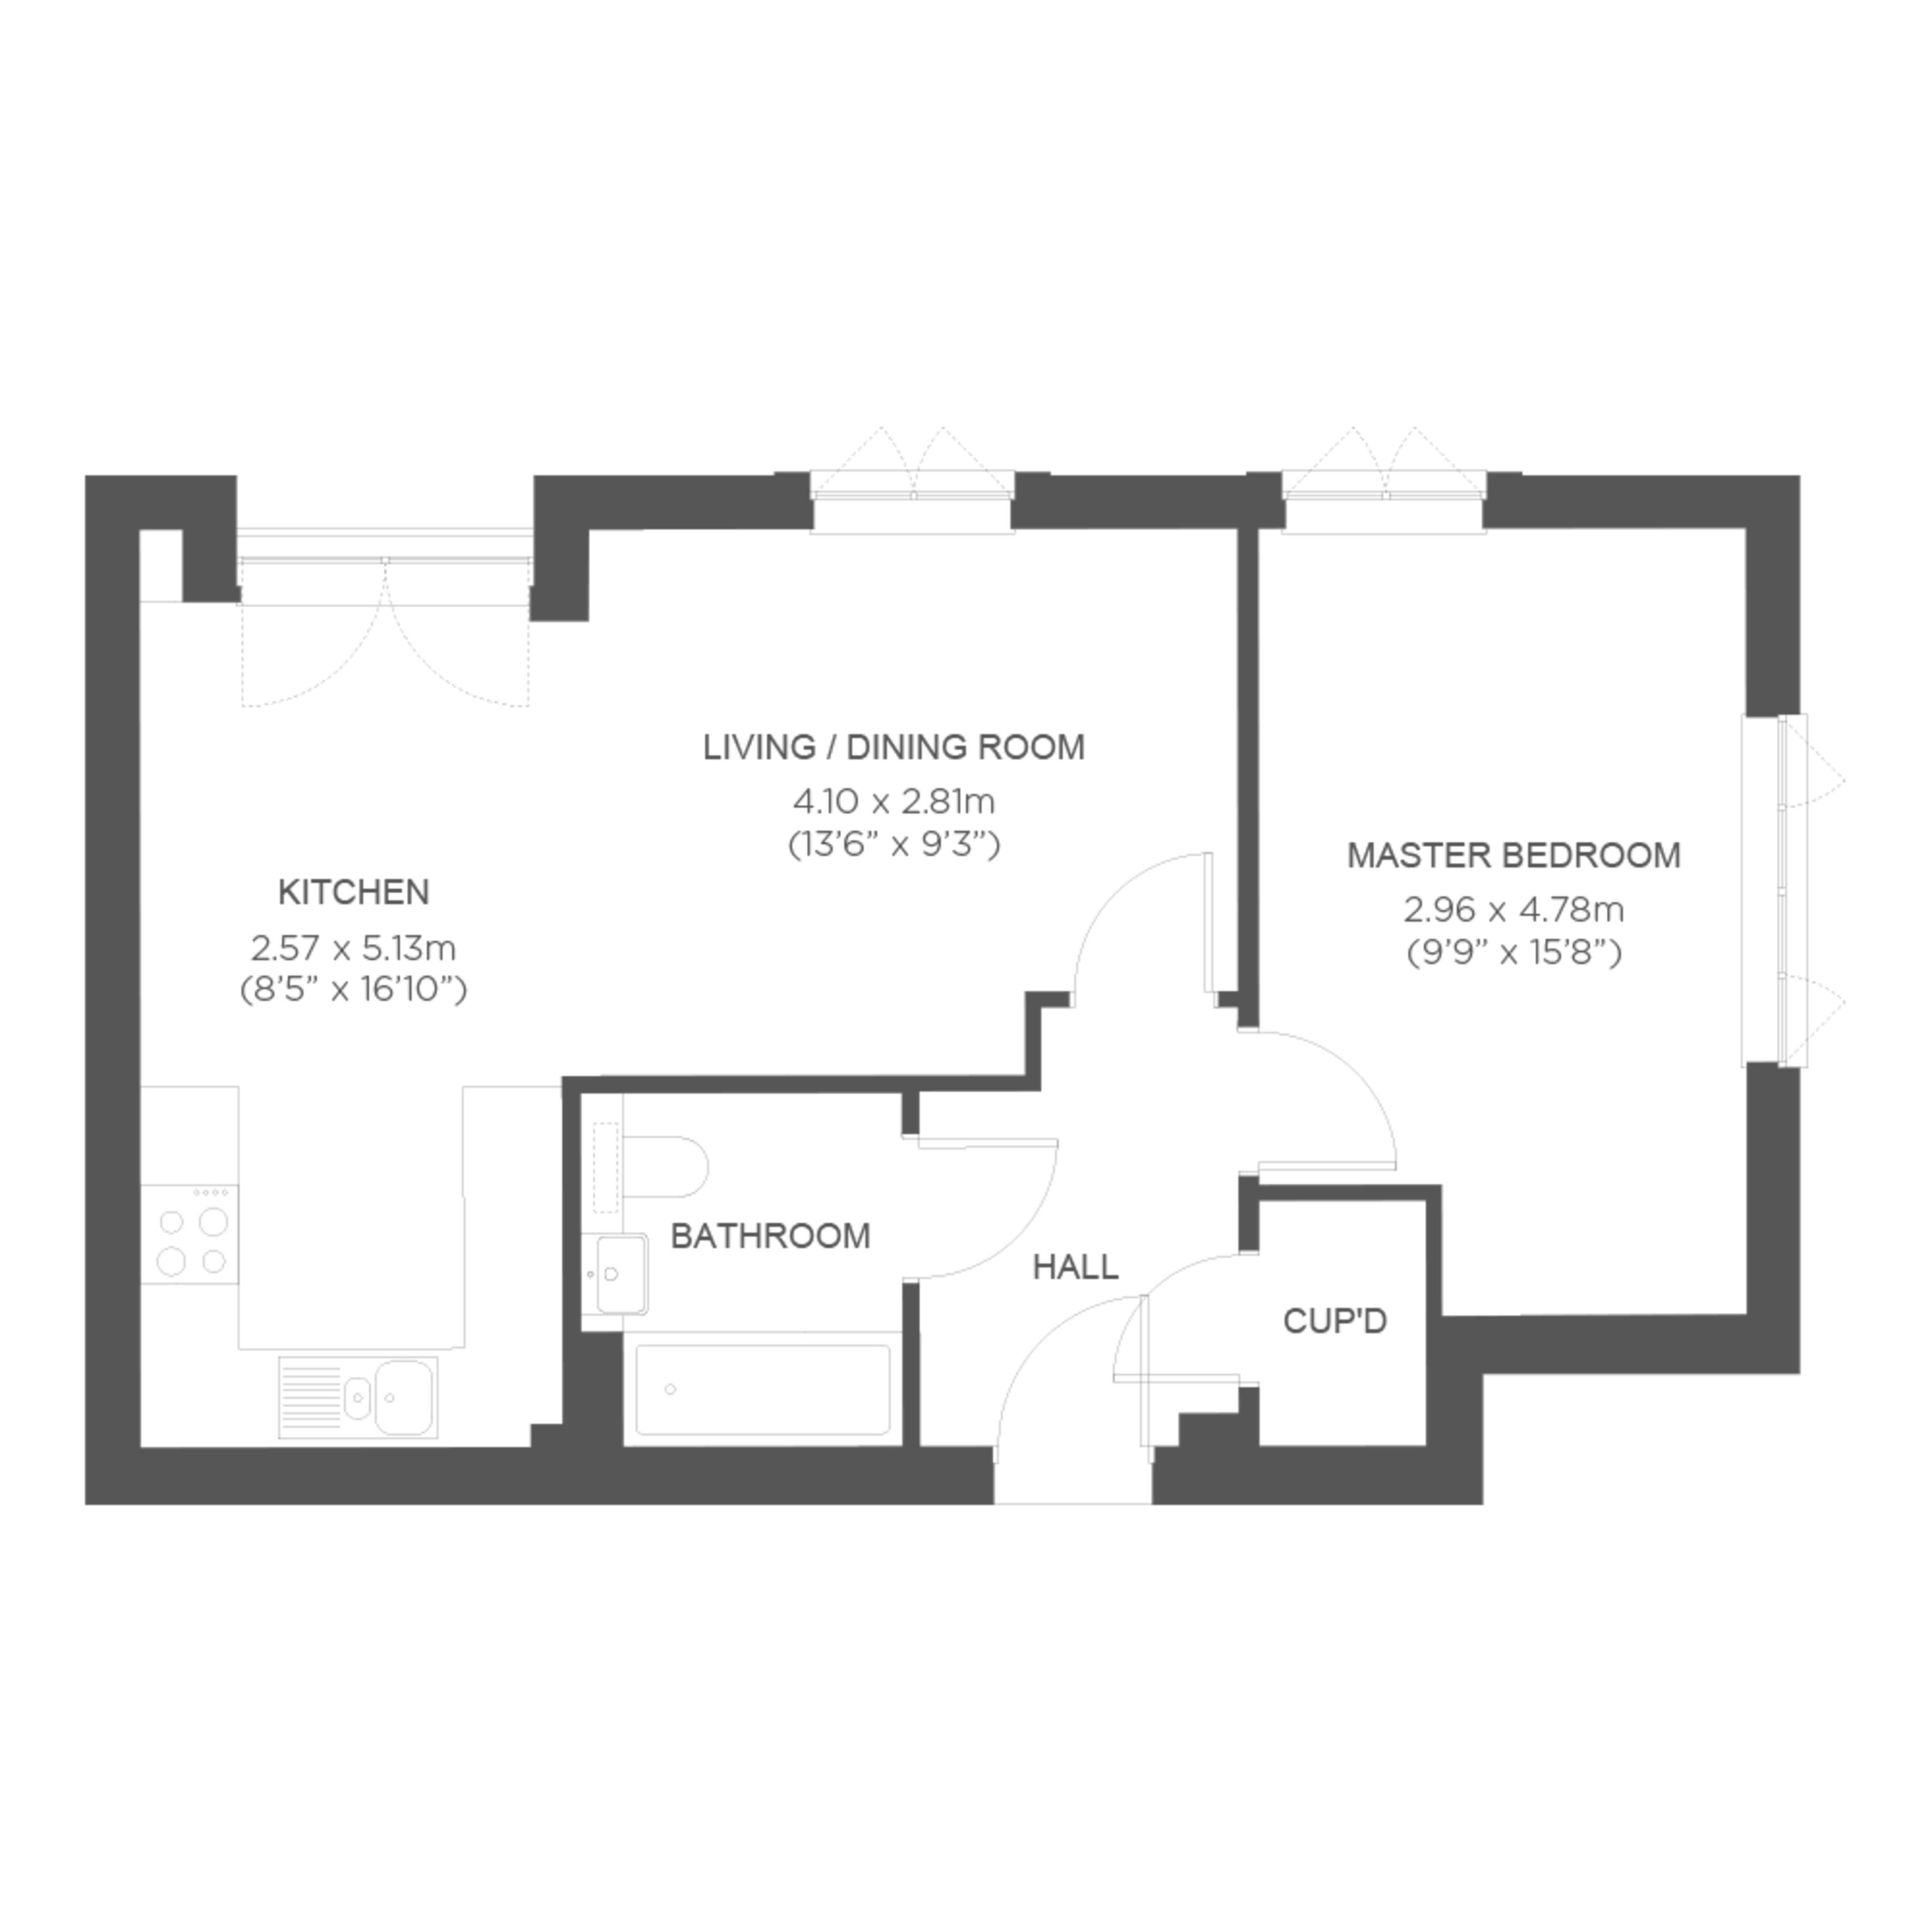 persona-homes-bowlers-court-flats-for-sale-chelmsford-floorplan-type-C-plot-3